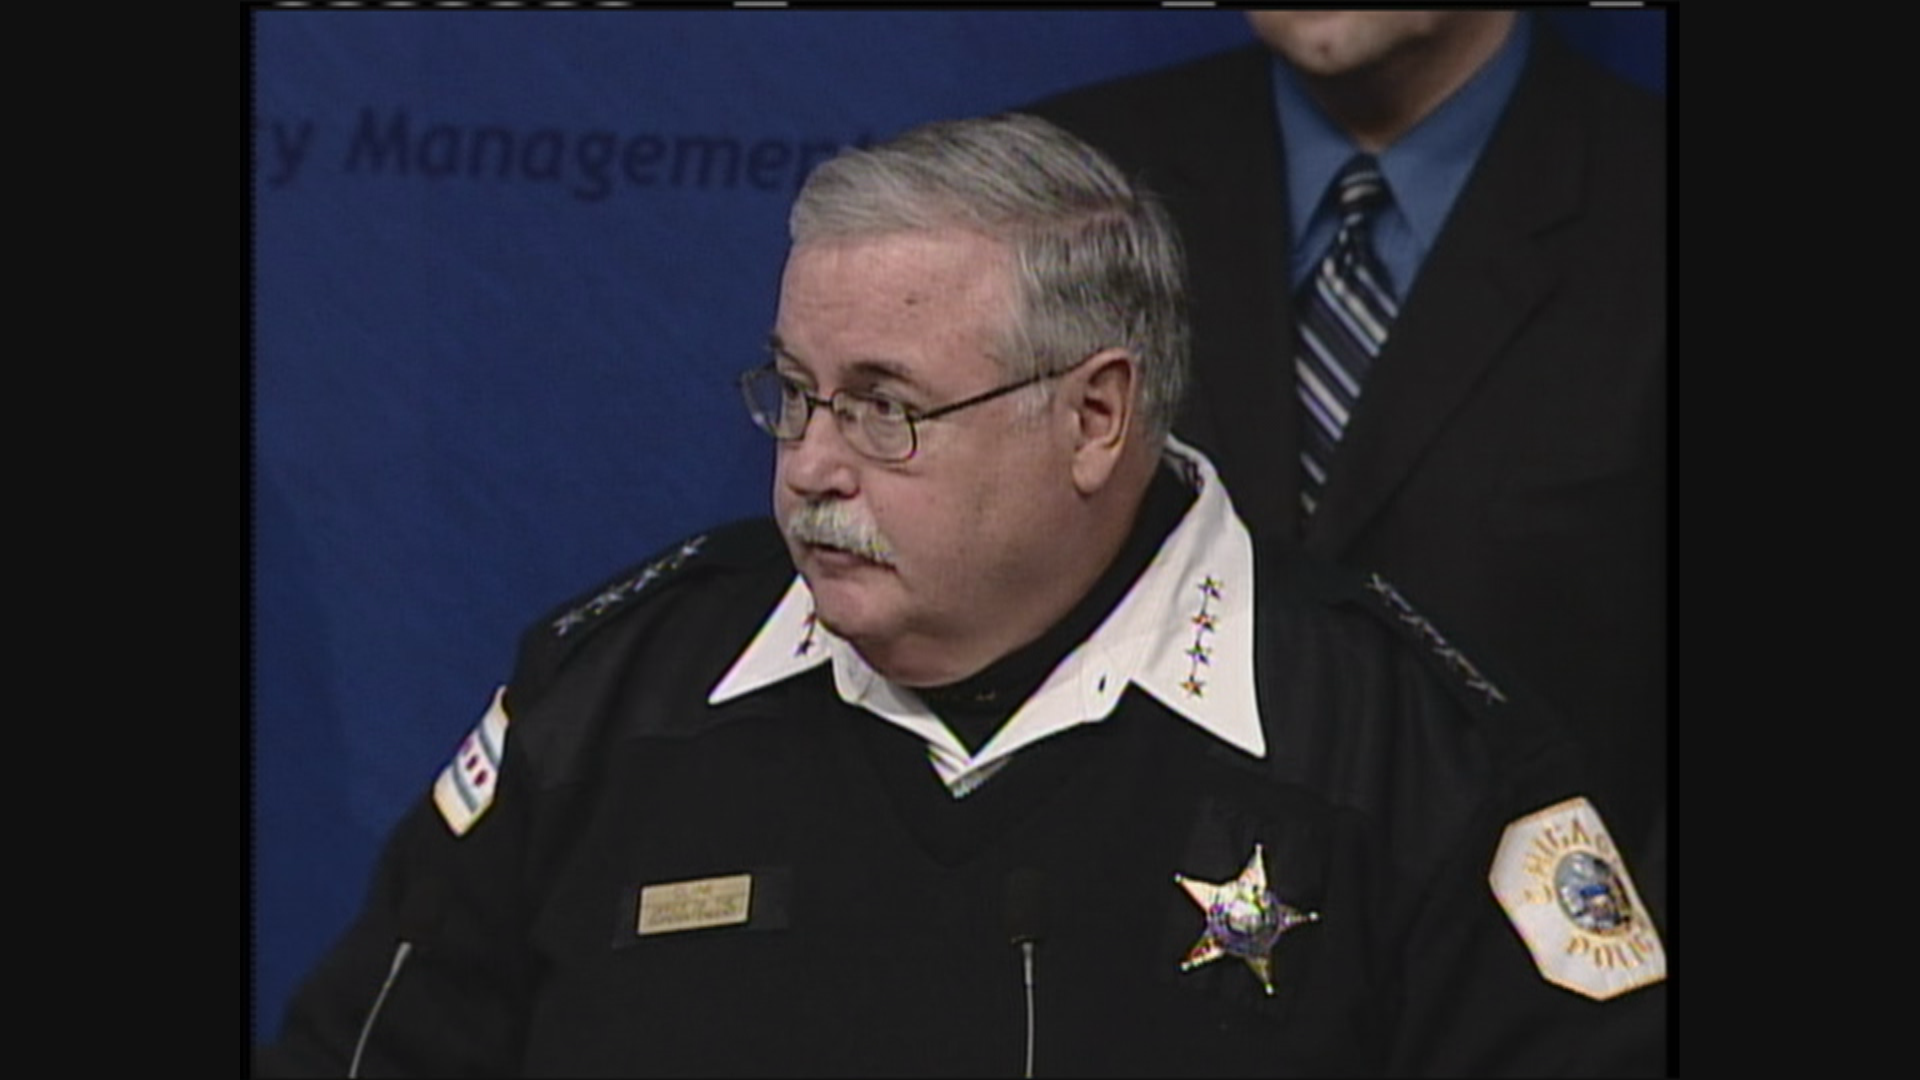 Police Superintendent Phil Cline speaks at a news conference on Oct. 26, 2005. (WTTW News)